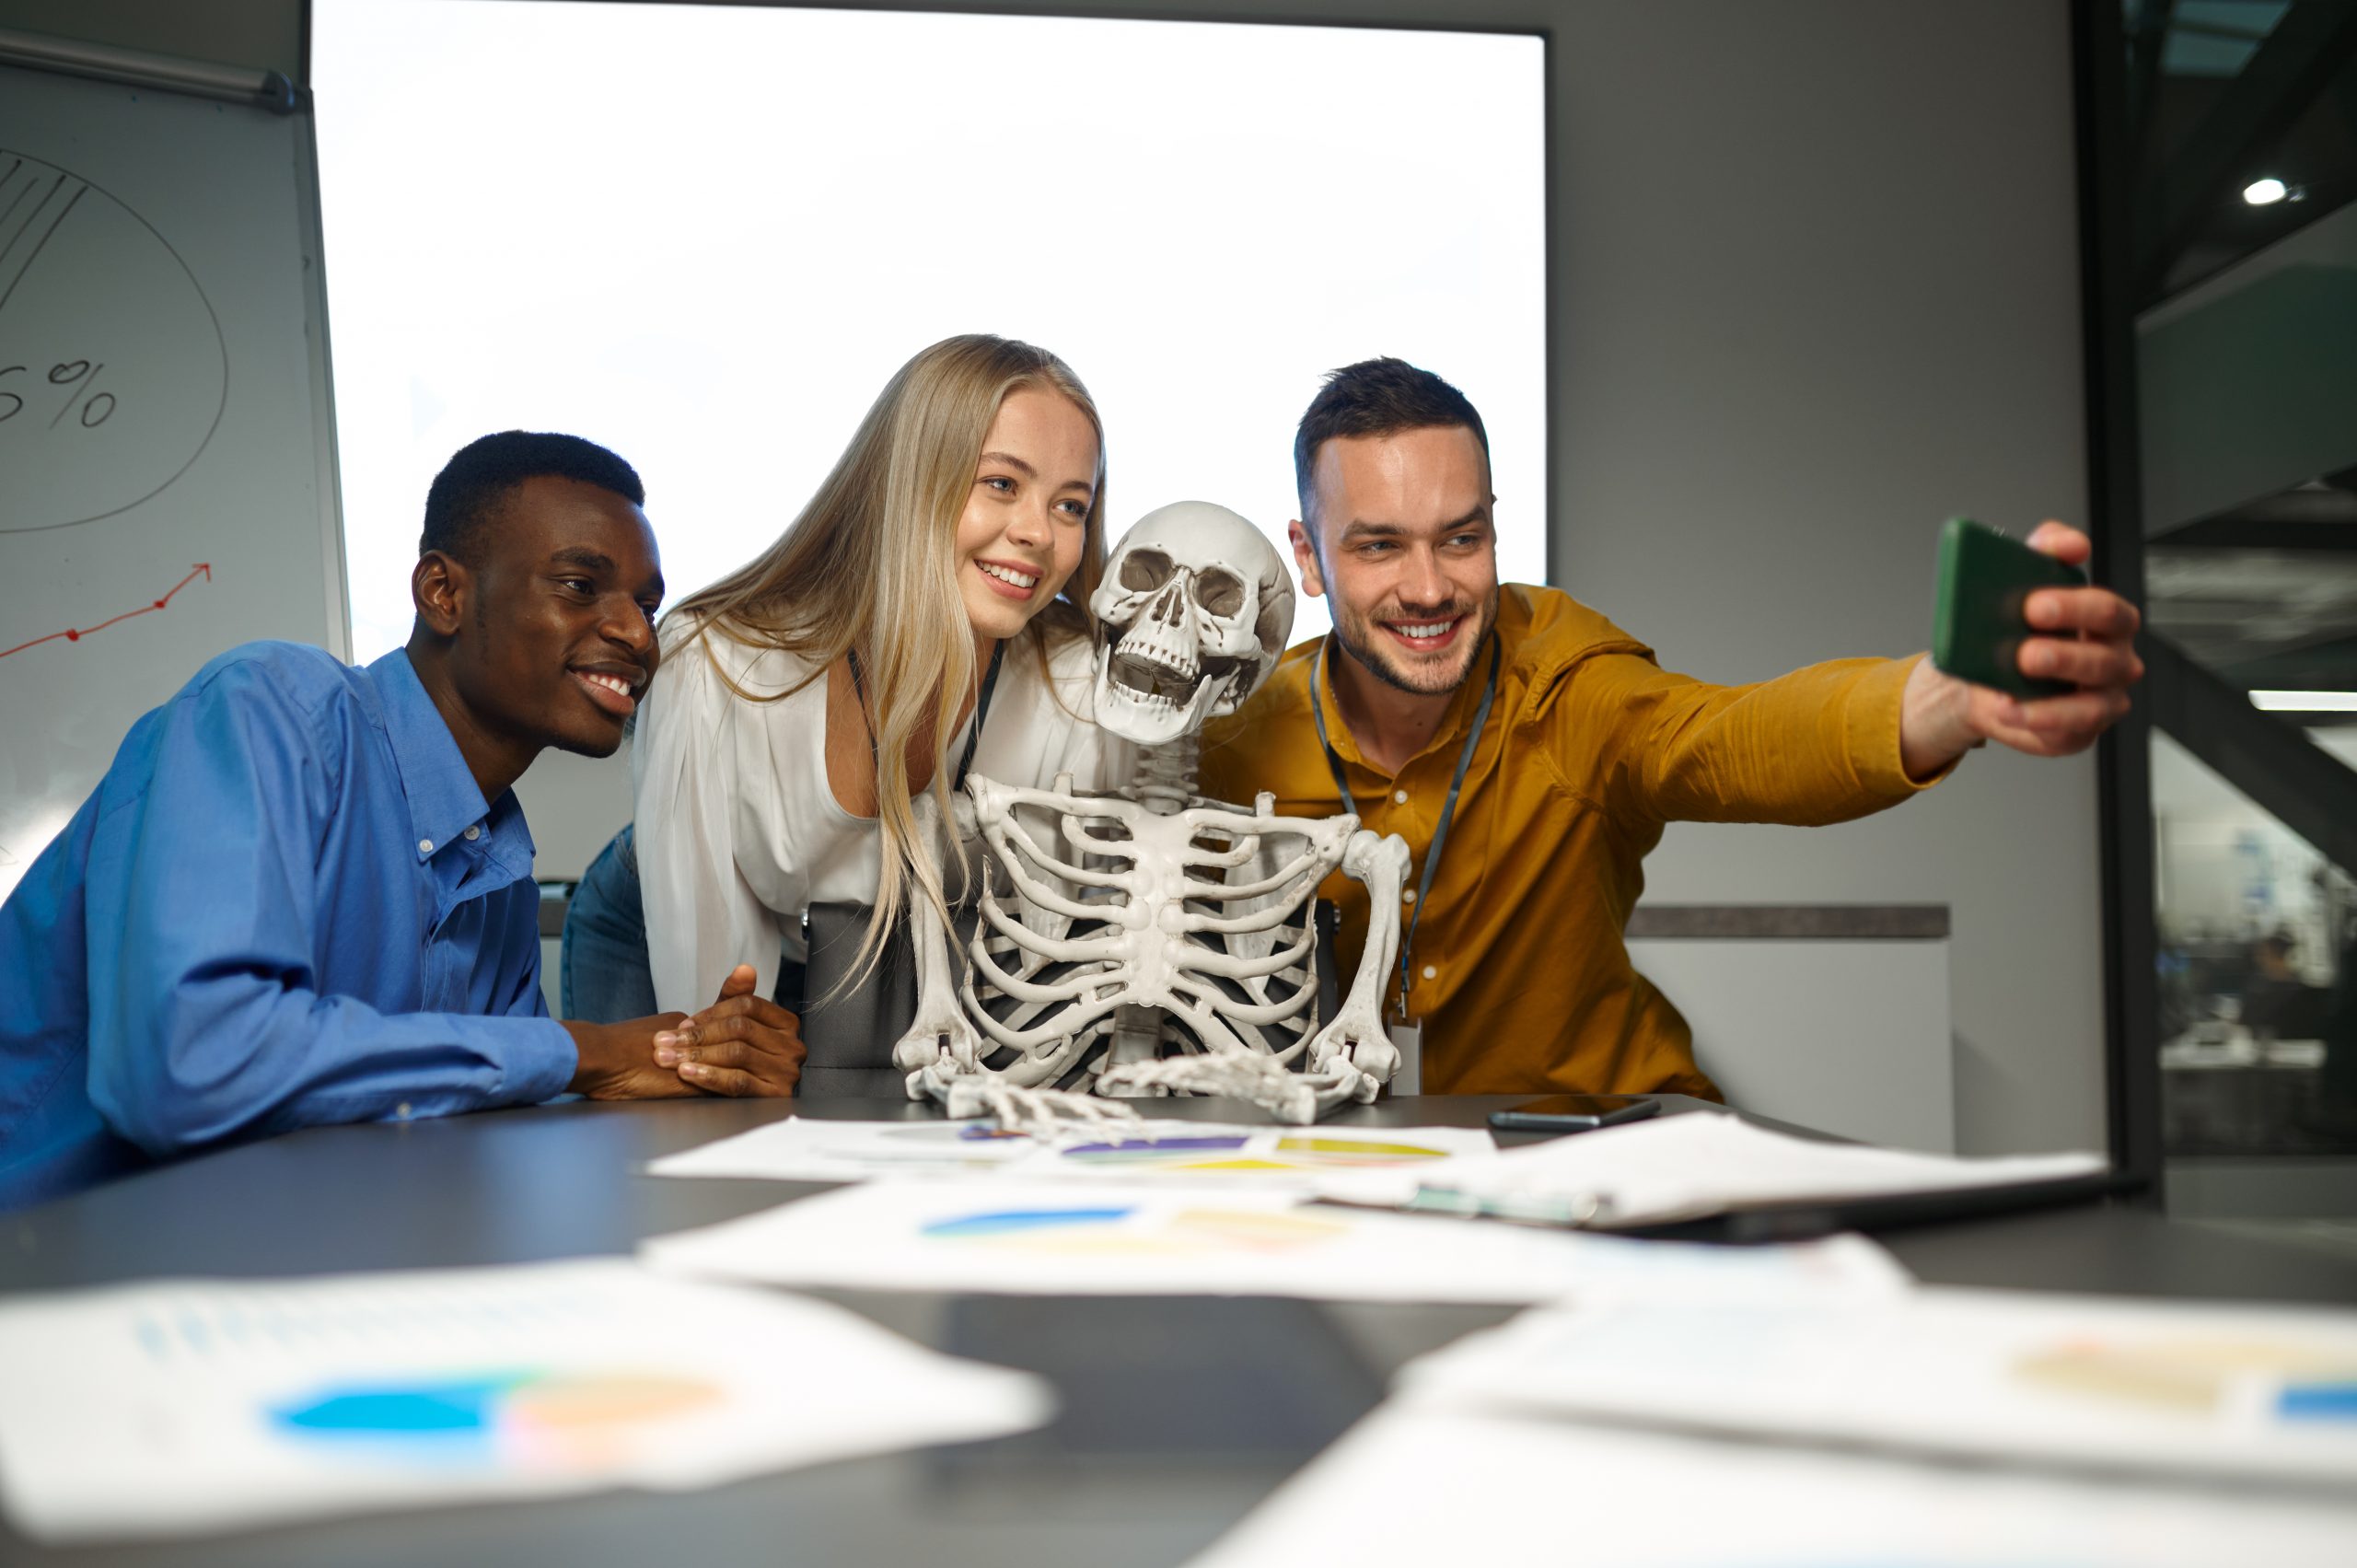 https://smpl.as/wp-content/uploads/2023/01/funny-managers-selfie-with-skeleton-in-it-office-2021-09-18-05-52-57-utc-scaled.jpg